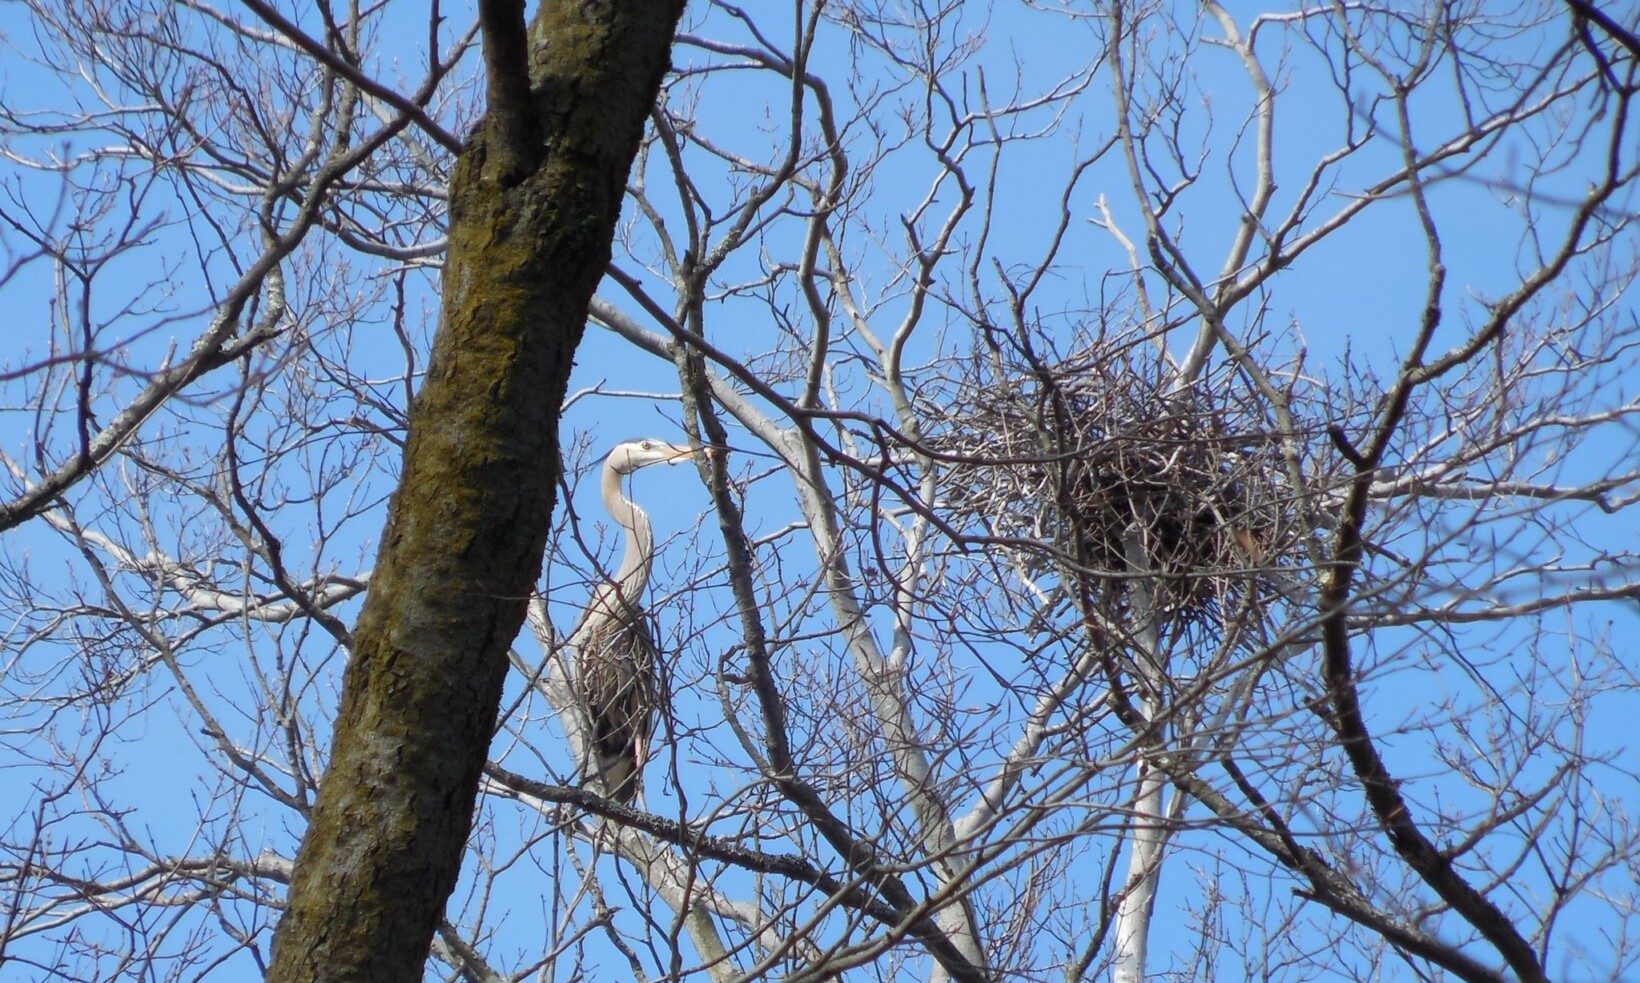 A Great Blue Heron at Norristown Farm Park